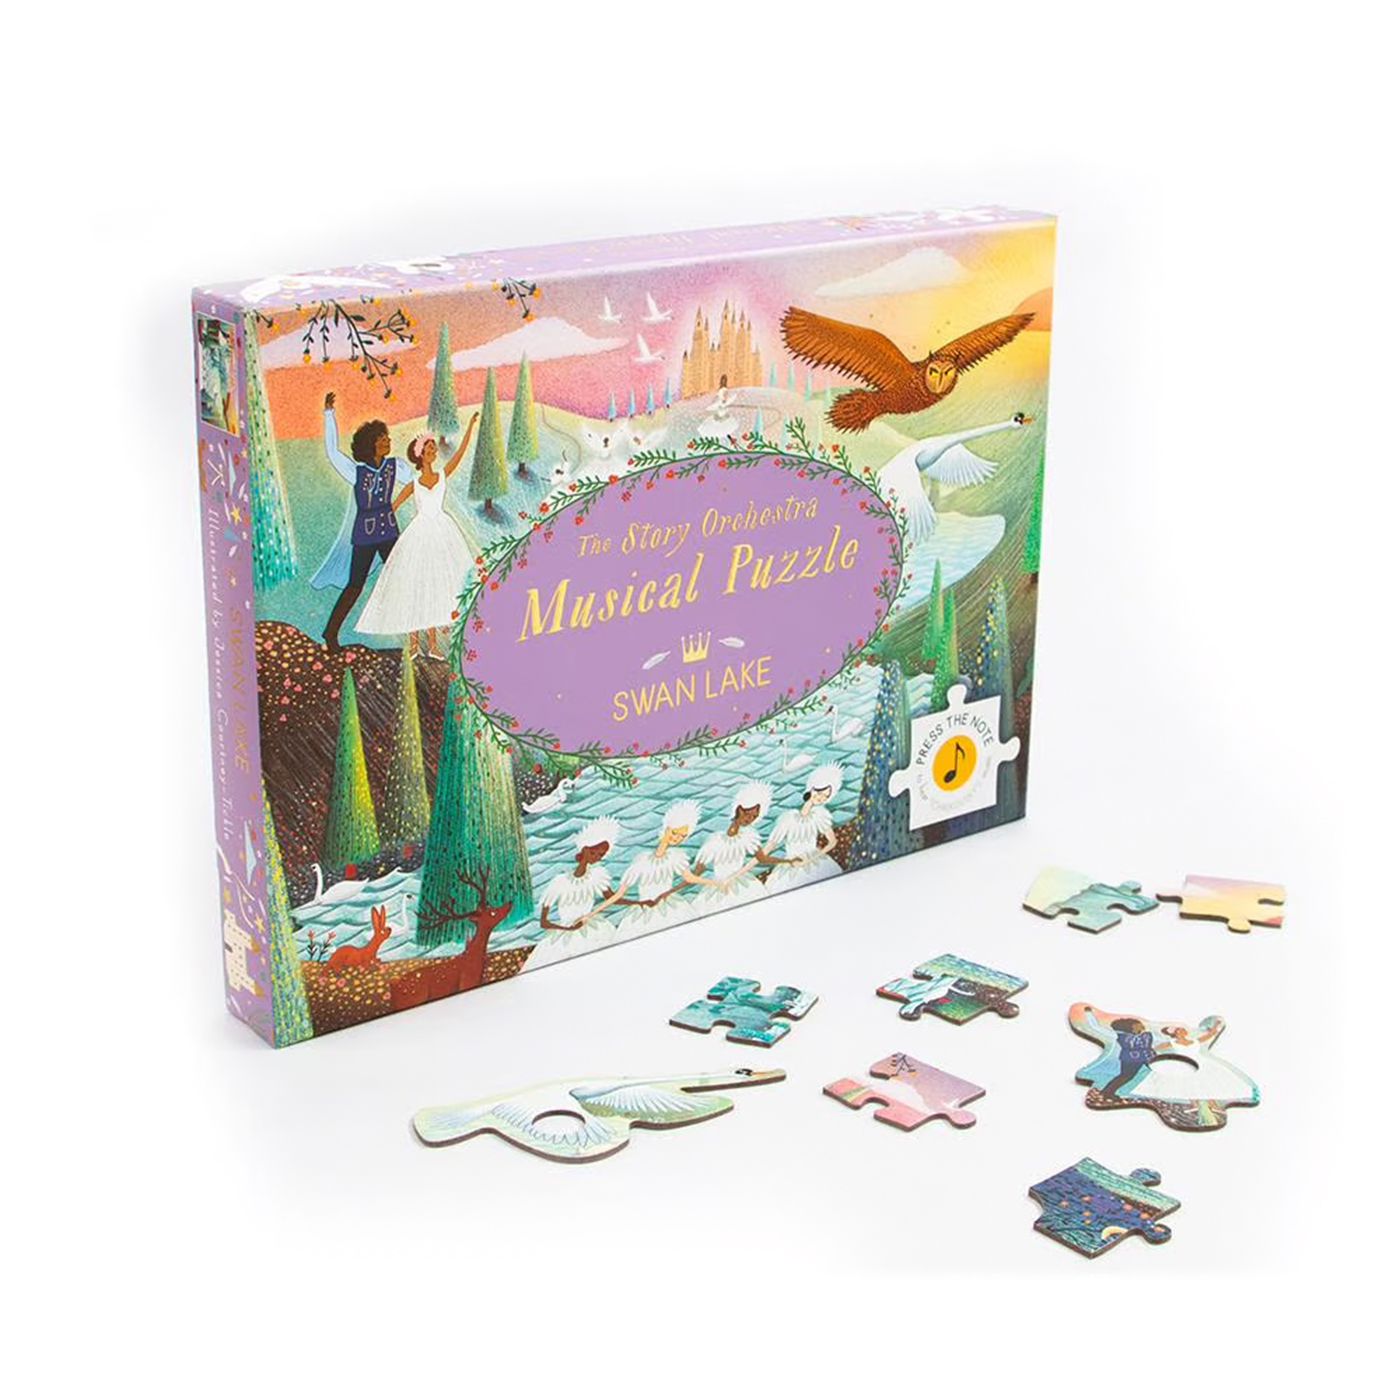 FRANCES LINCOLN Musical Puzzle - The Story Orchestra Swan Lake